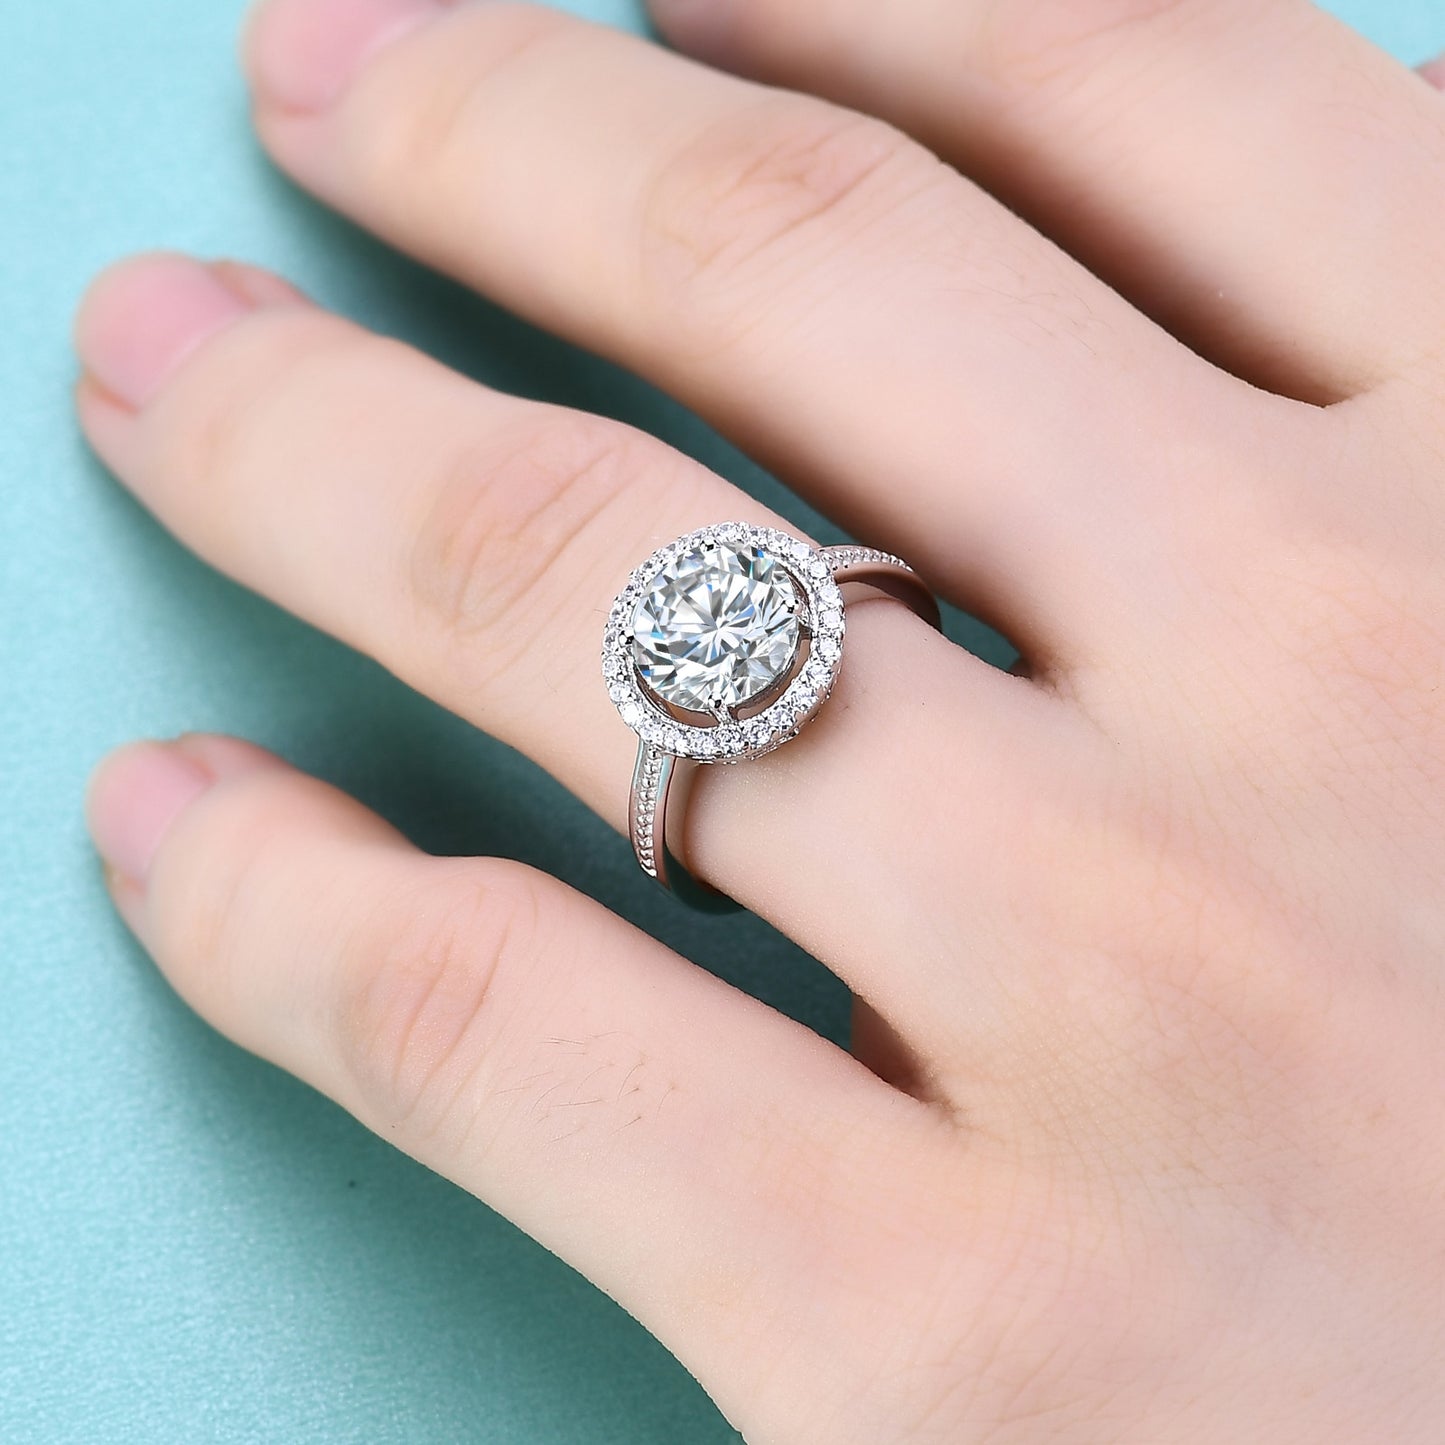 A silver halo ring set with a 2CT round moissanite encircled by a clear gem halo and set on a textured band worn on a ring finger.